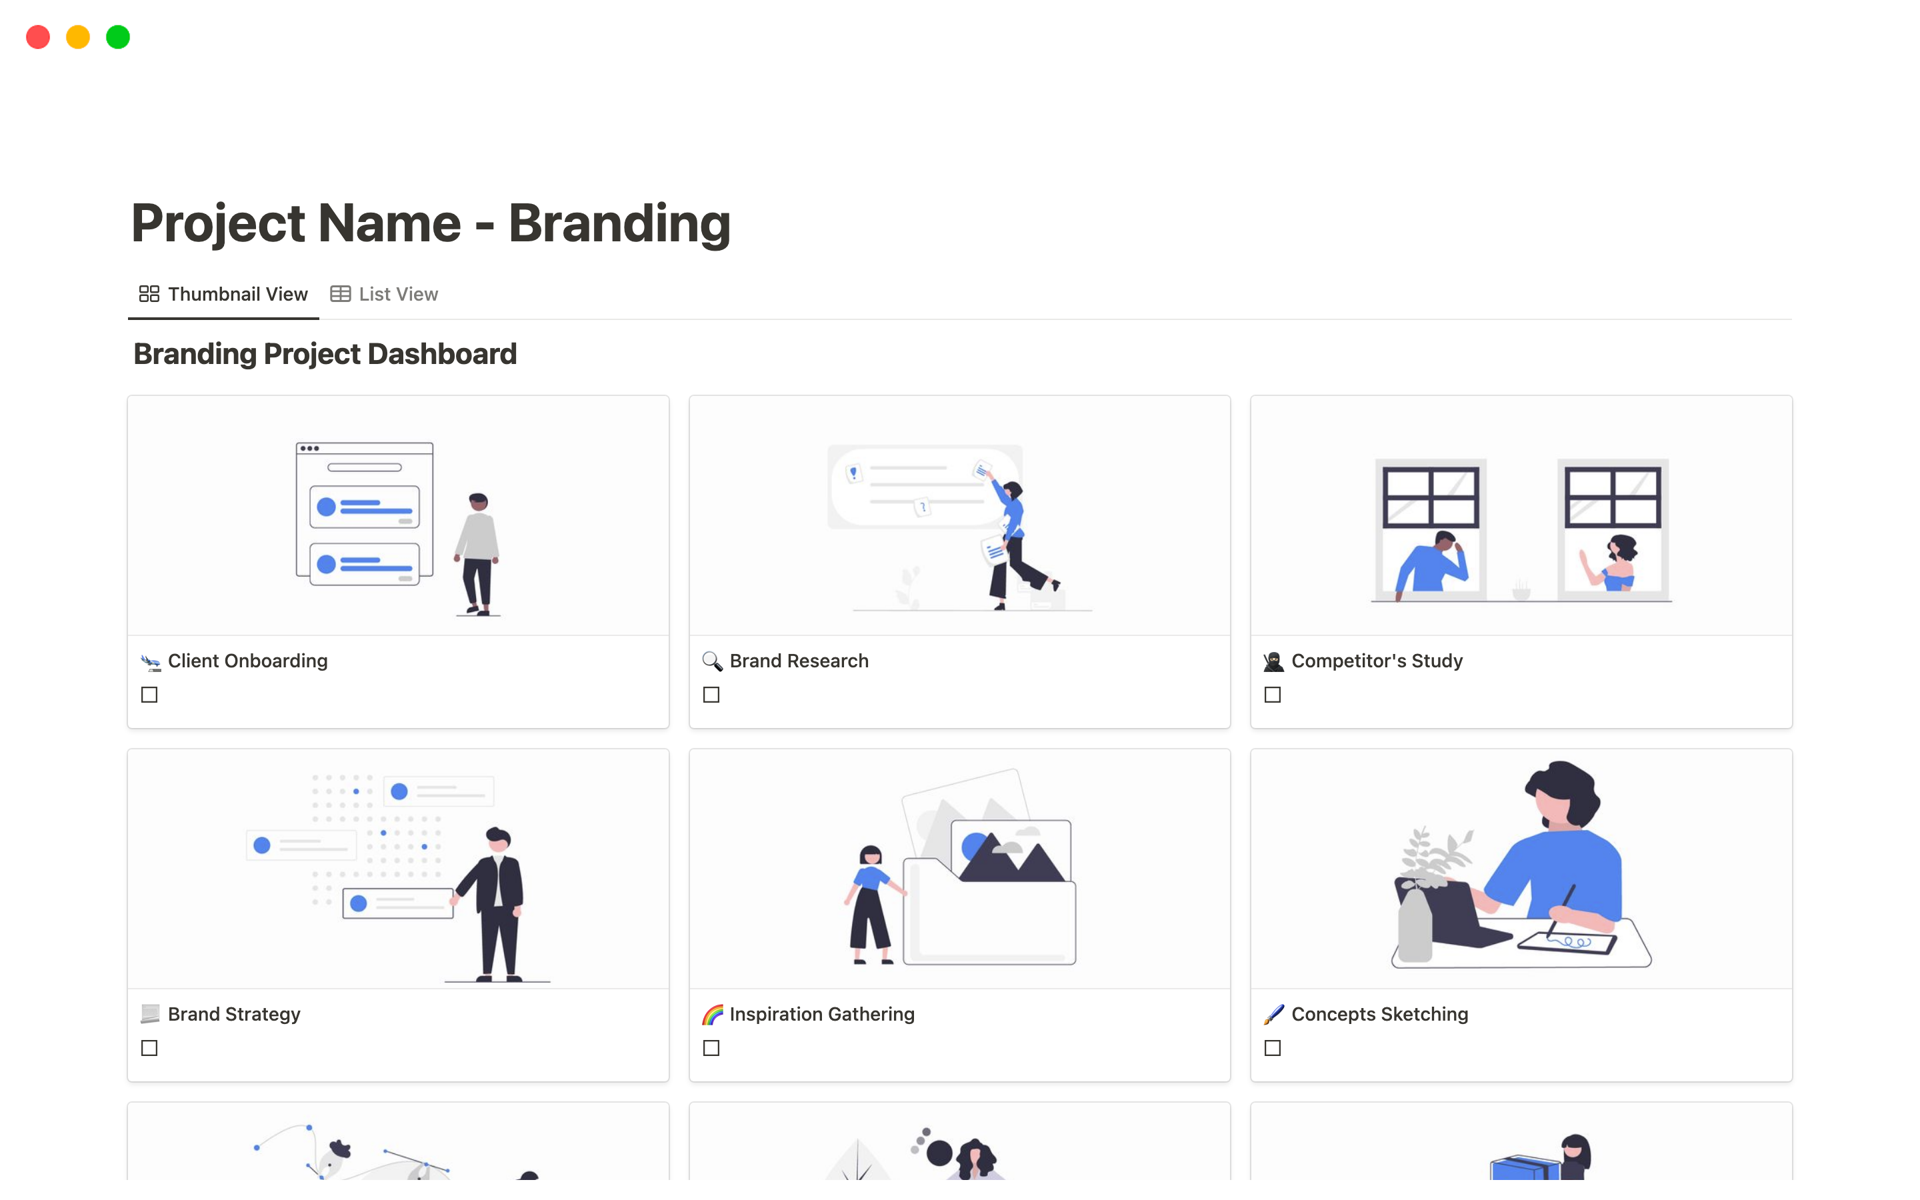 You can use this Notion Template to Manage Branding Projects